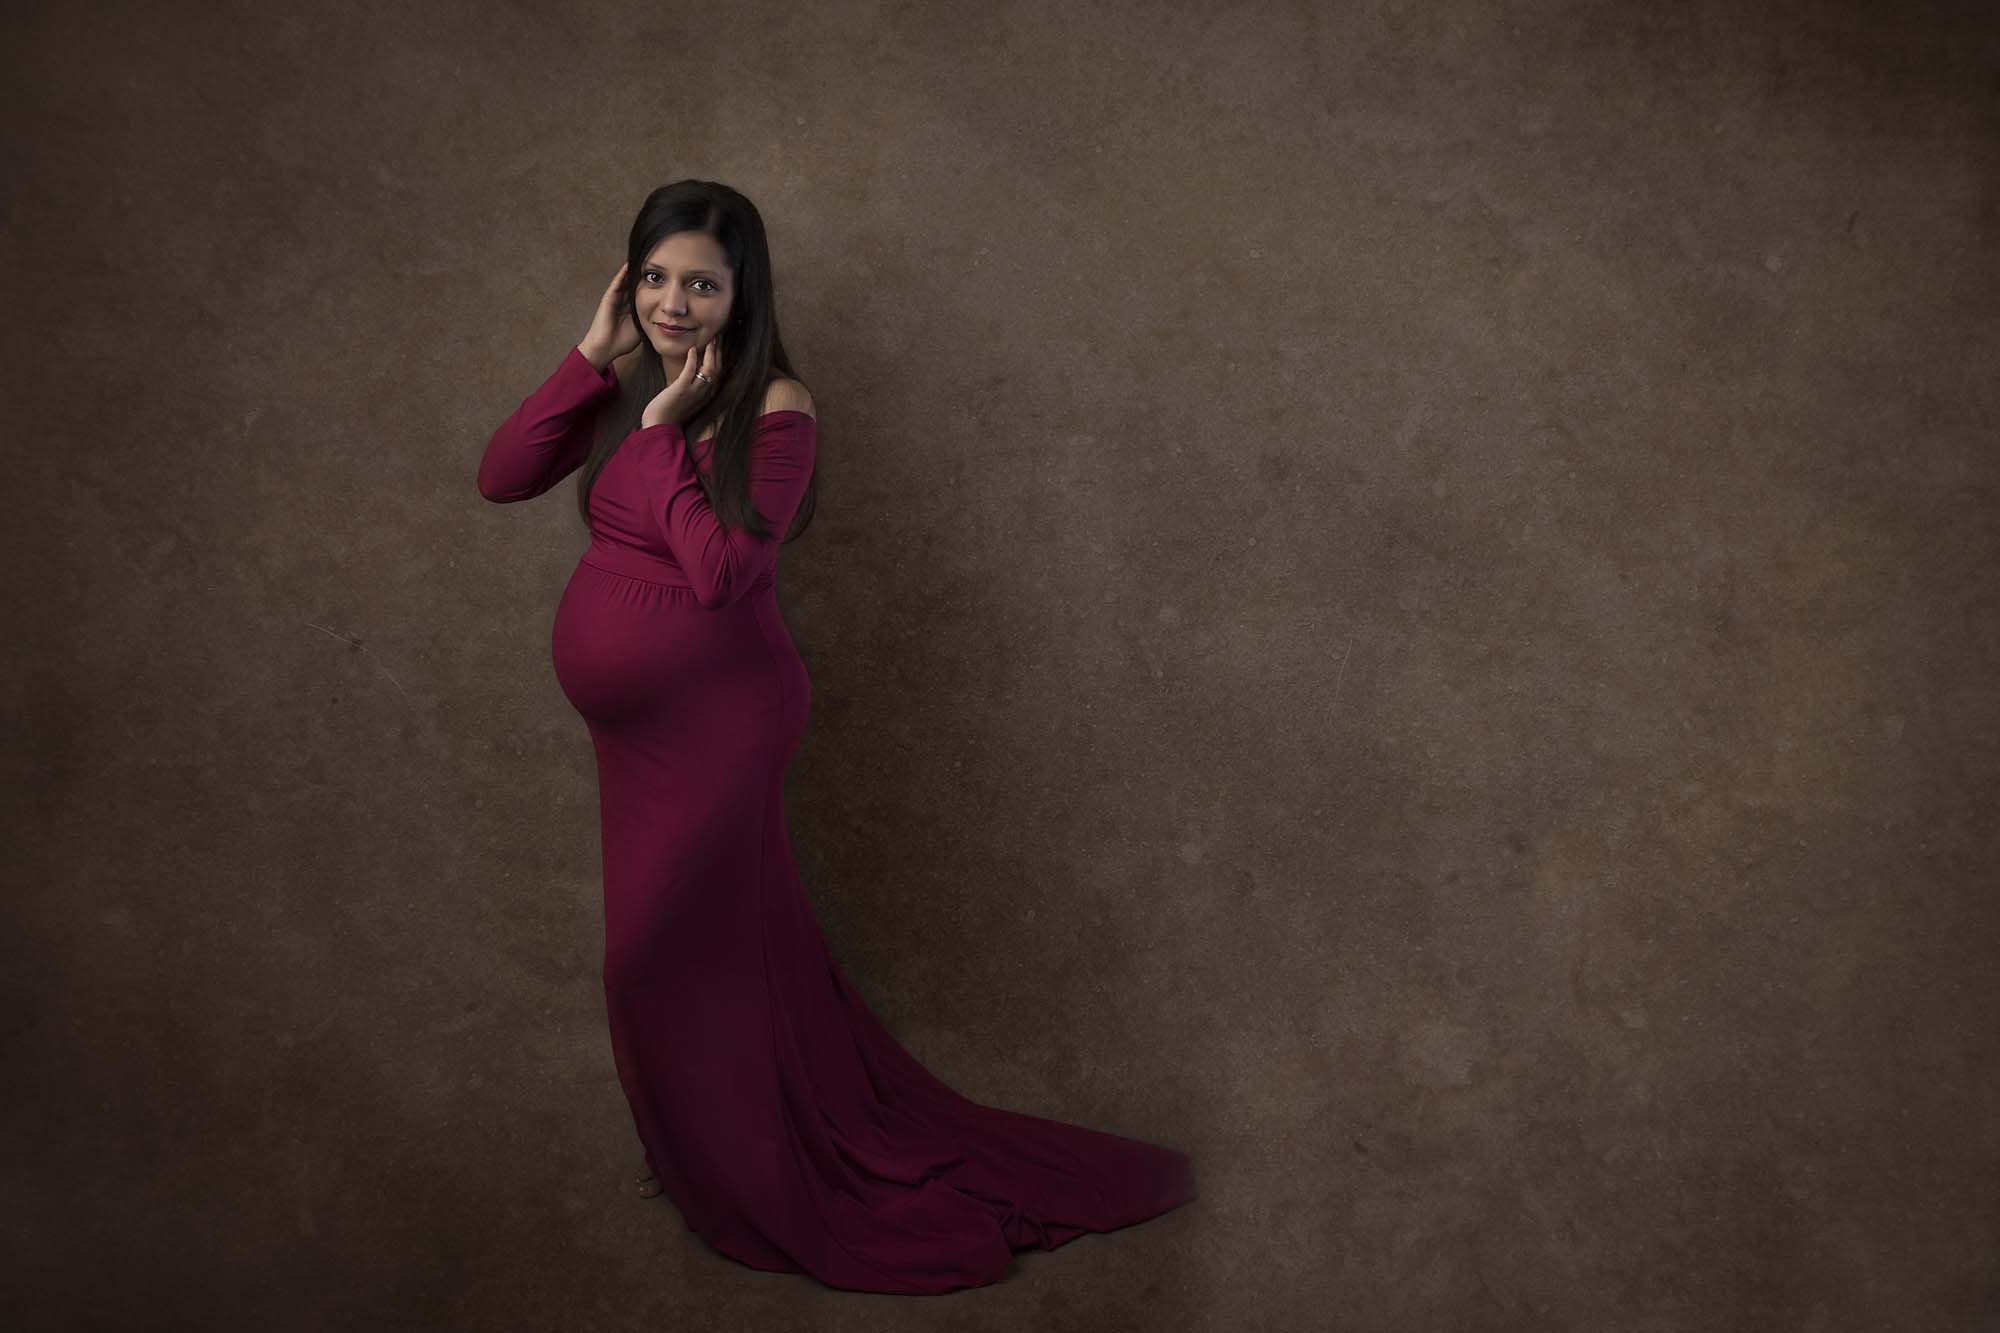 beautiful maternity portrait in professional photo studio photographed by Maternity Photographer Manchester